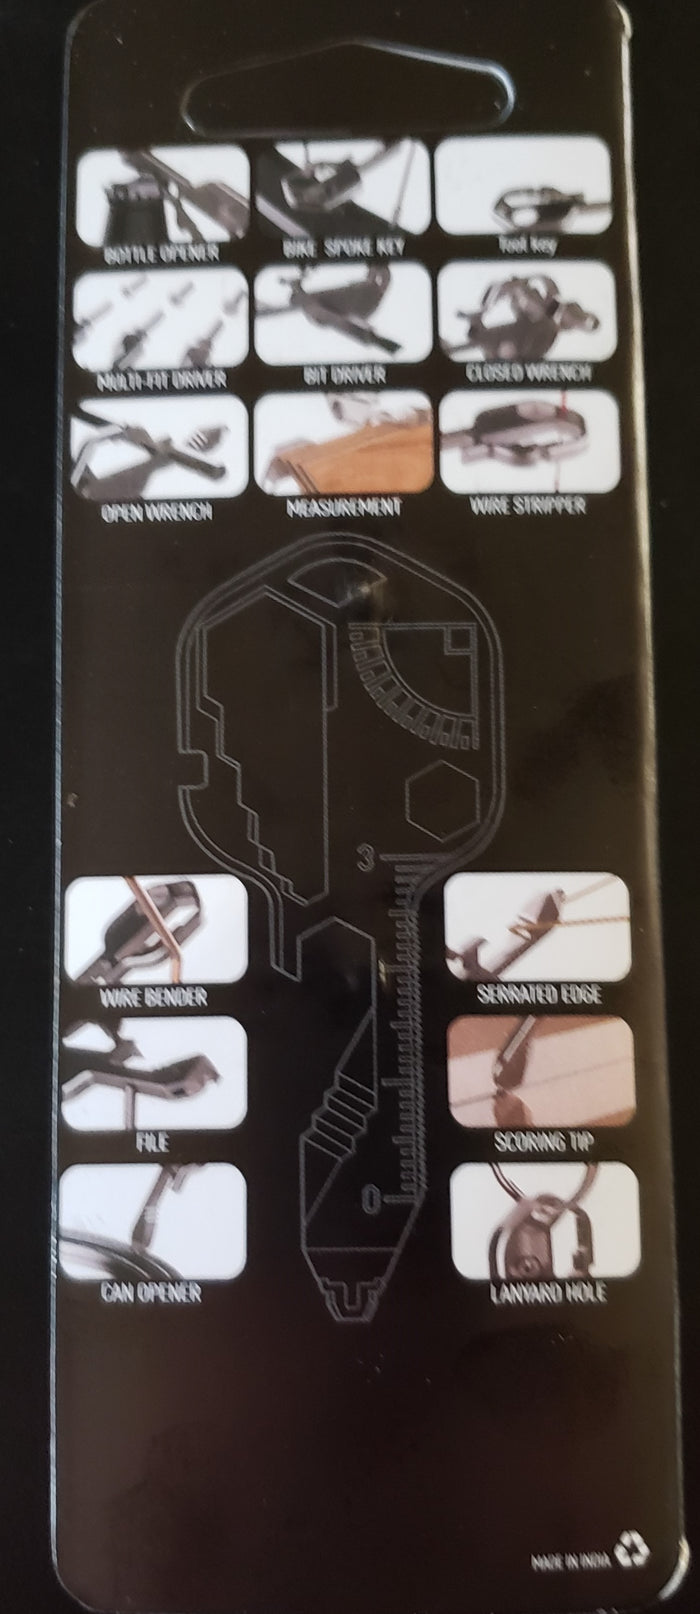 24 in 1 tool key available at puffin spot dot ca